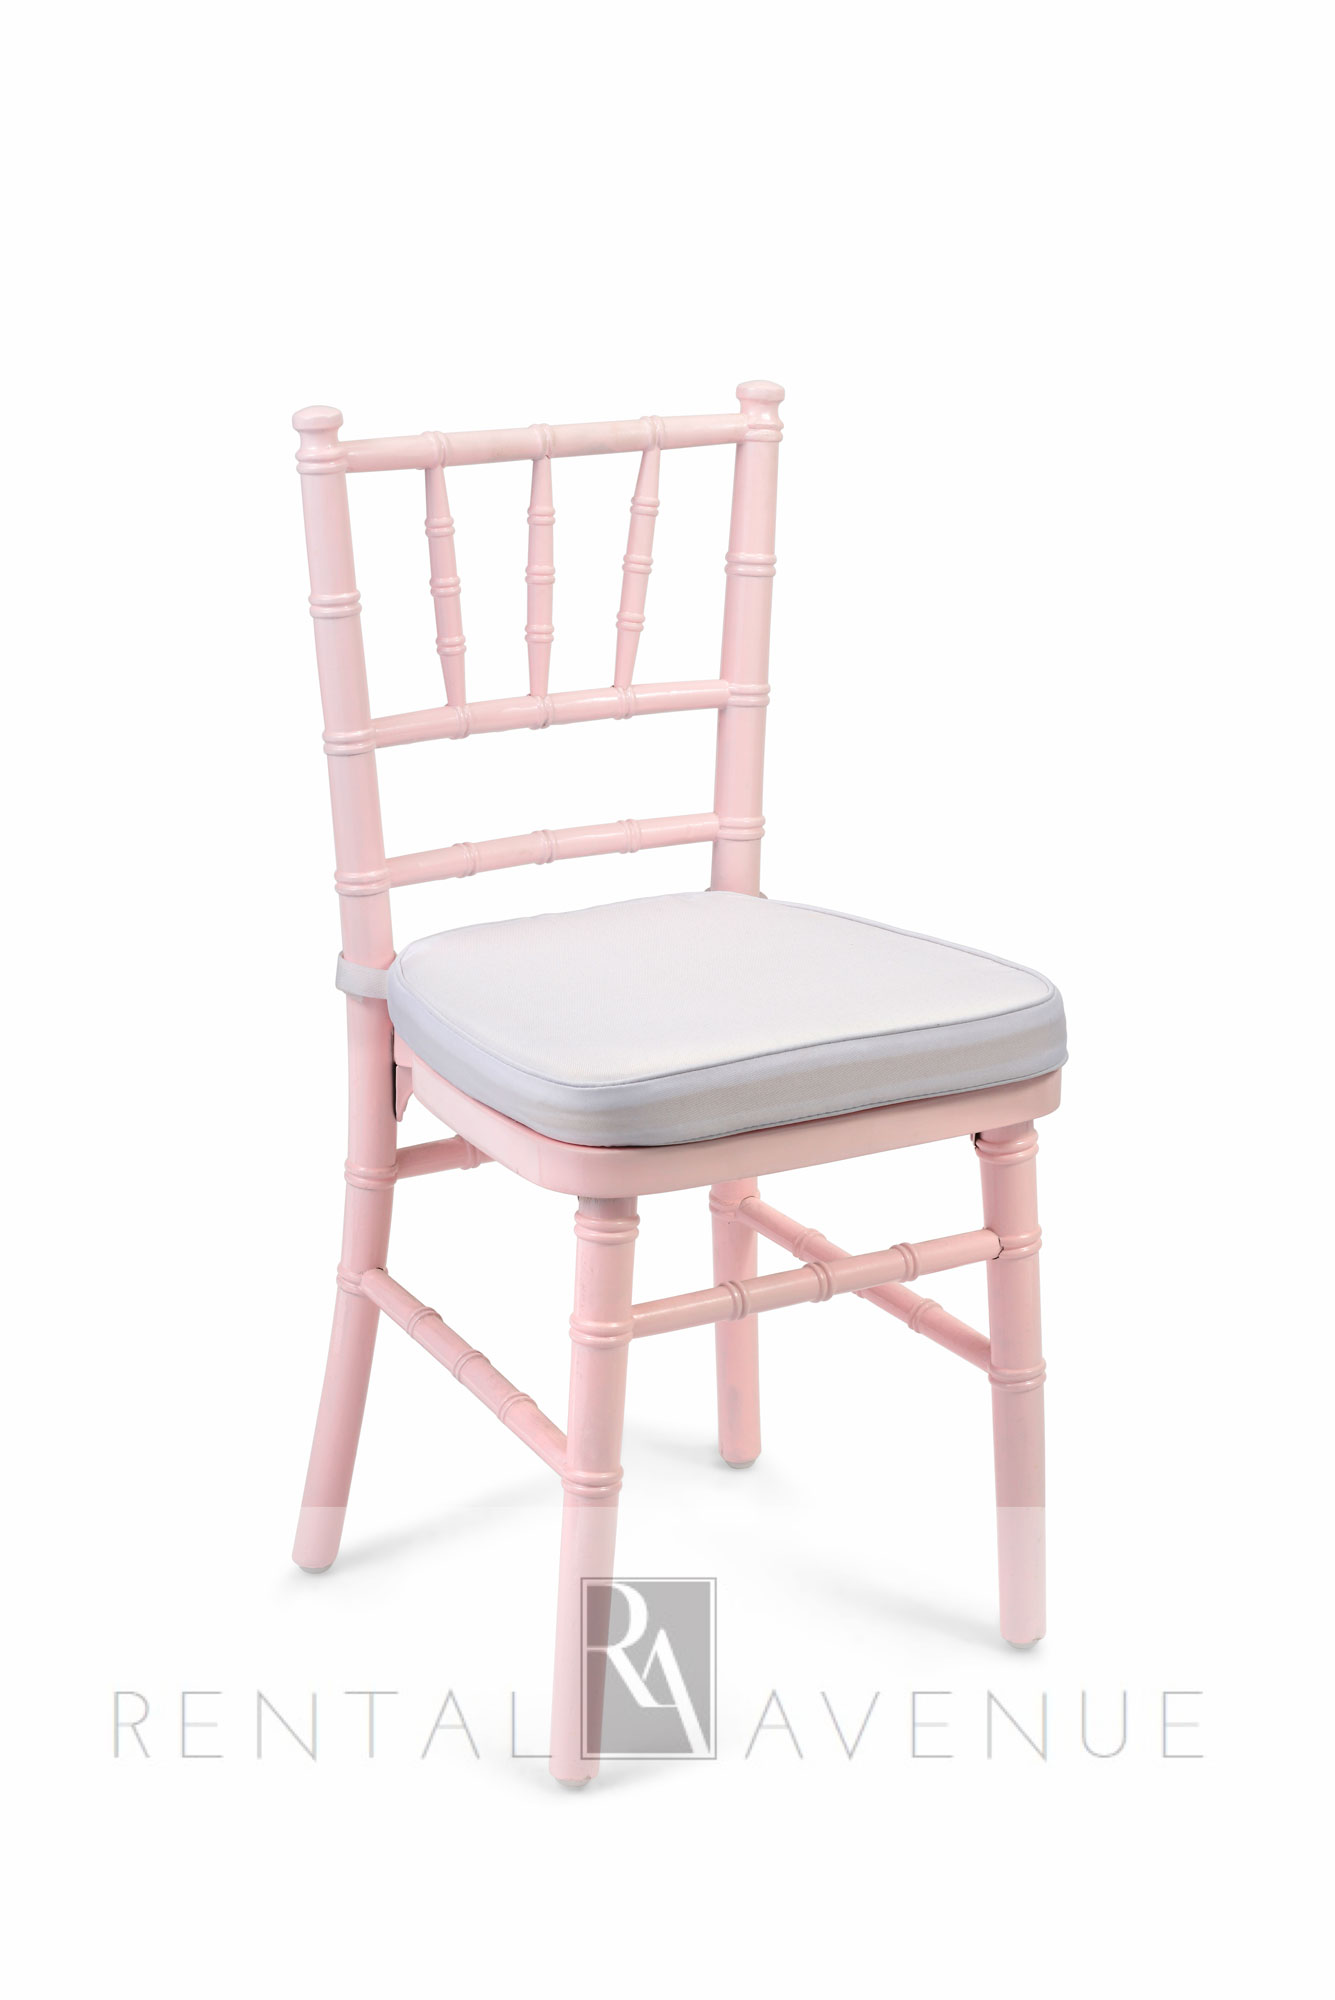 https://therentalave.com/wp-content/uploads/2020/03/therentalave_kids_chairs_chiavari_pink.jpg